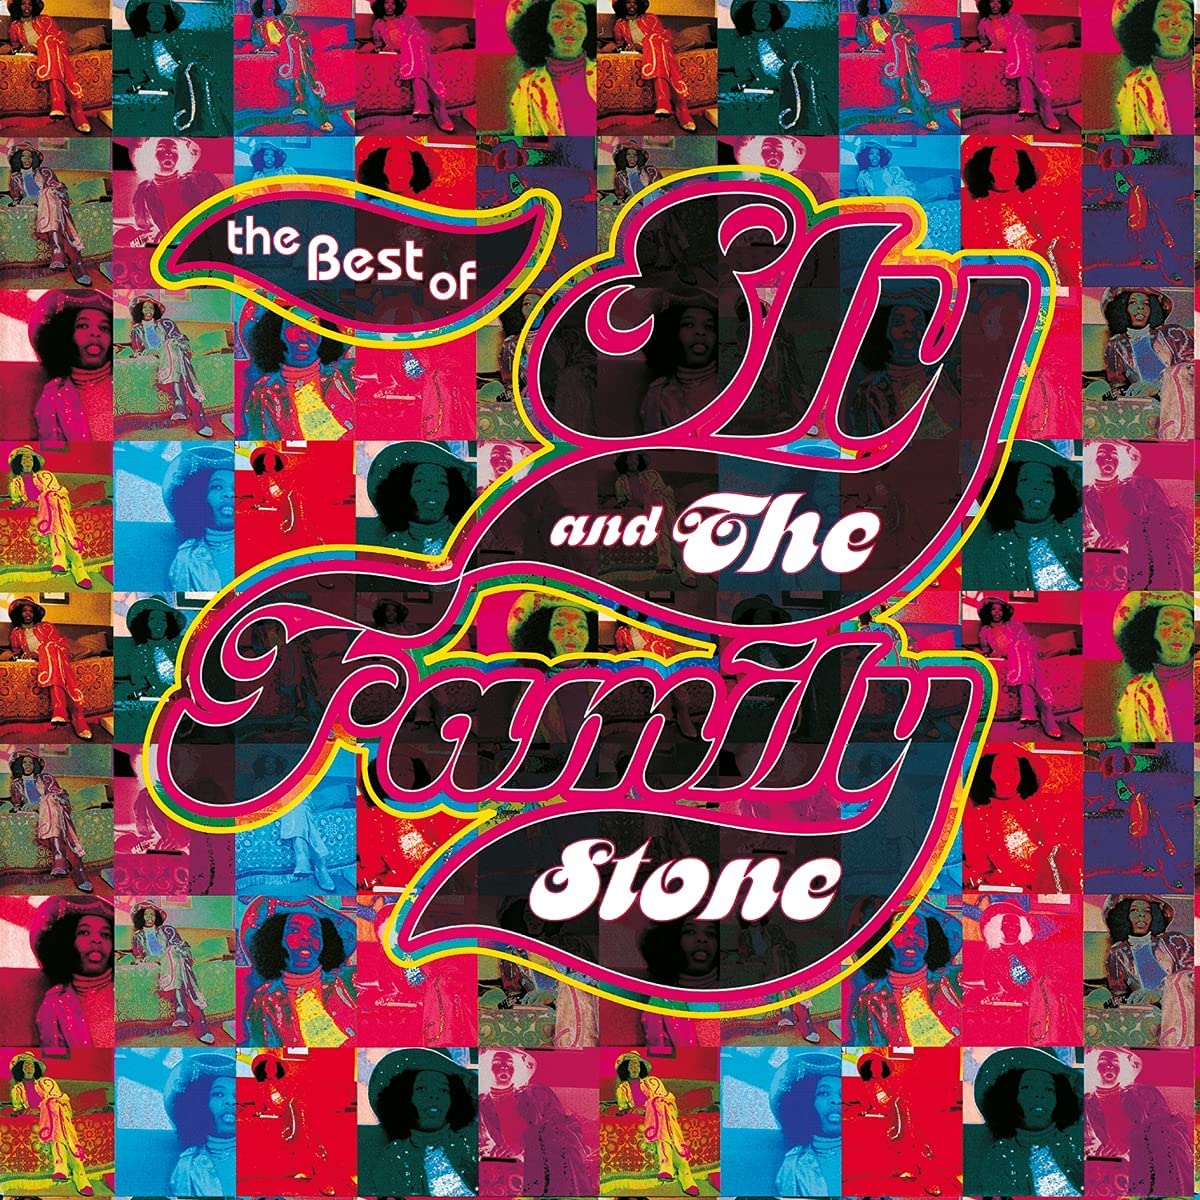 Copertina Vinile 33 giri The Best Of di Sly and The Family Stone